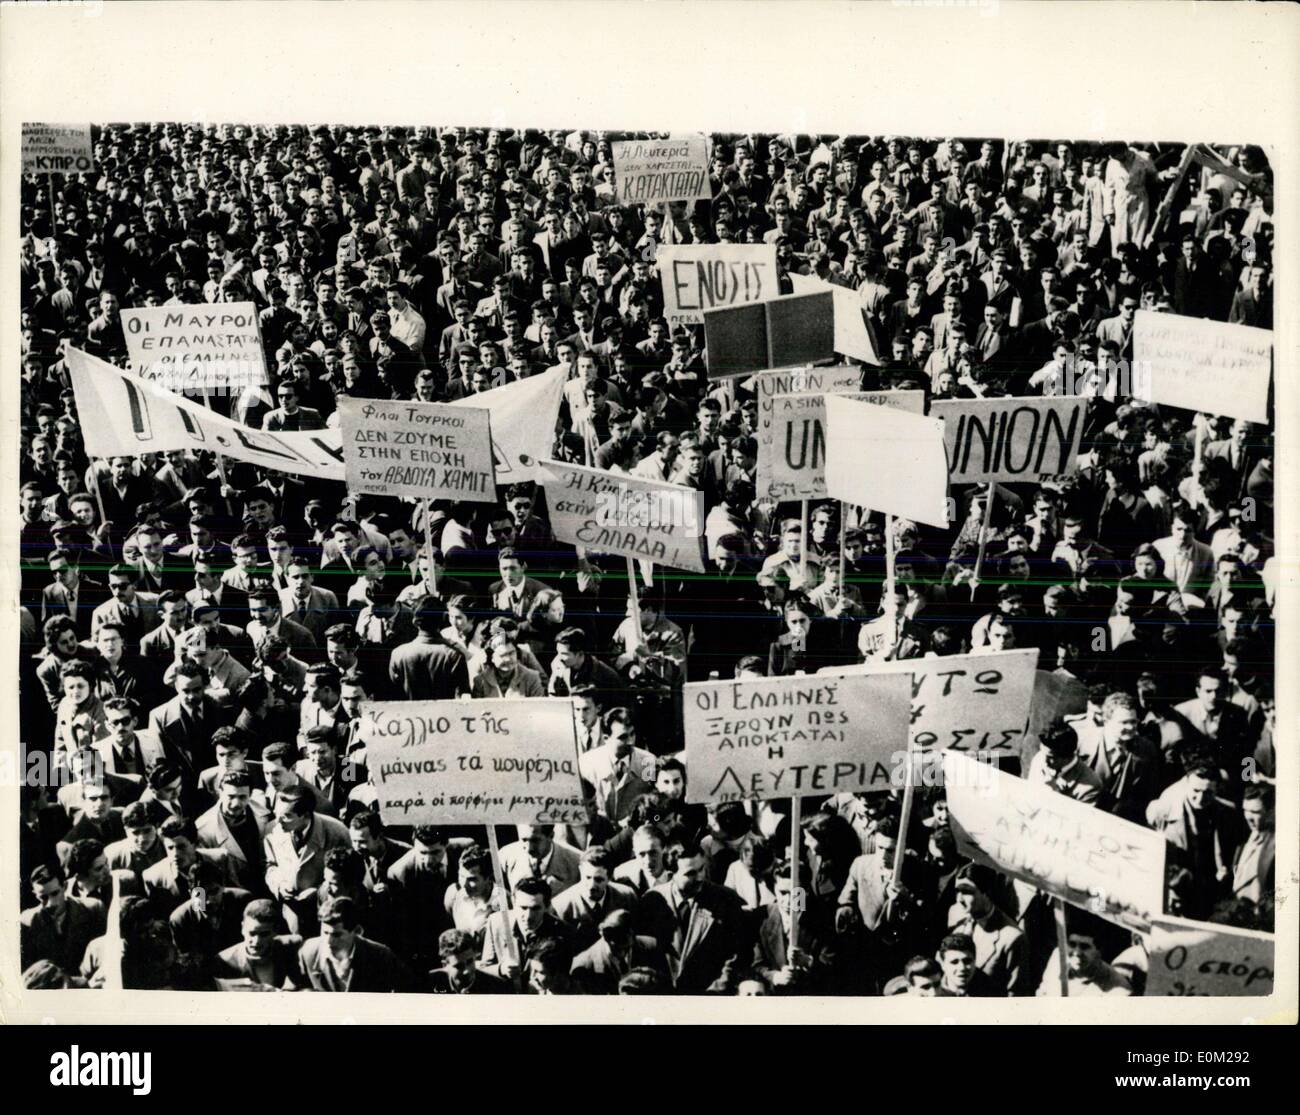 Mar. 07, 1953 - Students Demonstrate in Athens over the Cyprus Question: A rowdy demonstration took place in Athens recently- over the old old question of Cyprus. It was originally organized by the students committee for Cypriot Struggle as a protest against the United nations' Assembly refusal to enter the Cypriot question on the agends. The demonstration started very quietly in the Athens University Squares. After a few Firey speeches the situation got out of hand when some students - said to be communists- suggested going to the various embassies Stock Photo